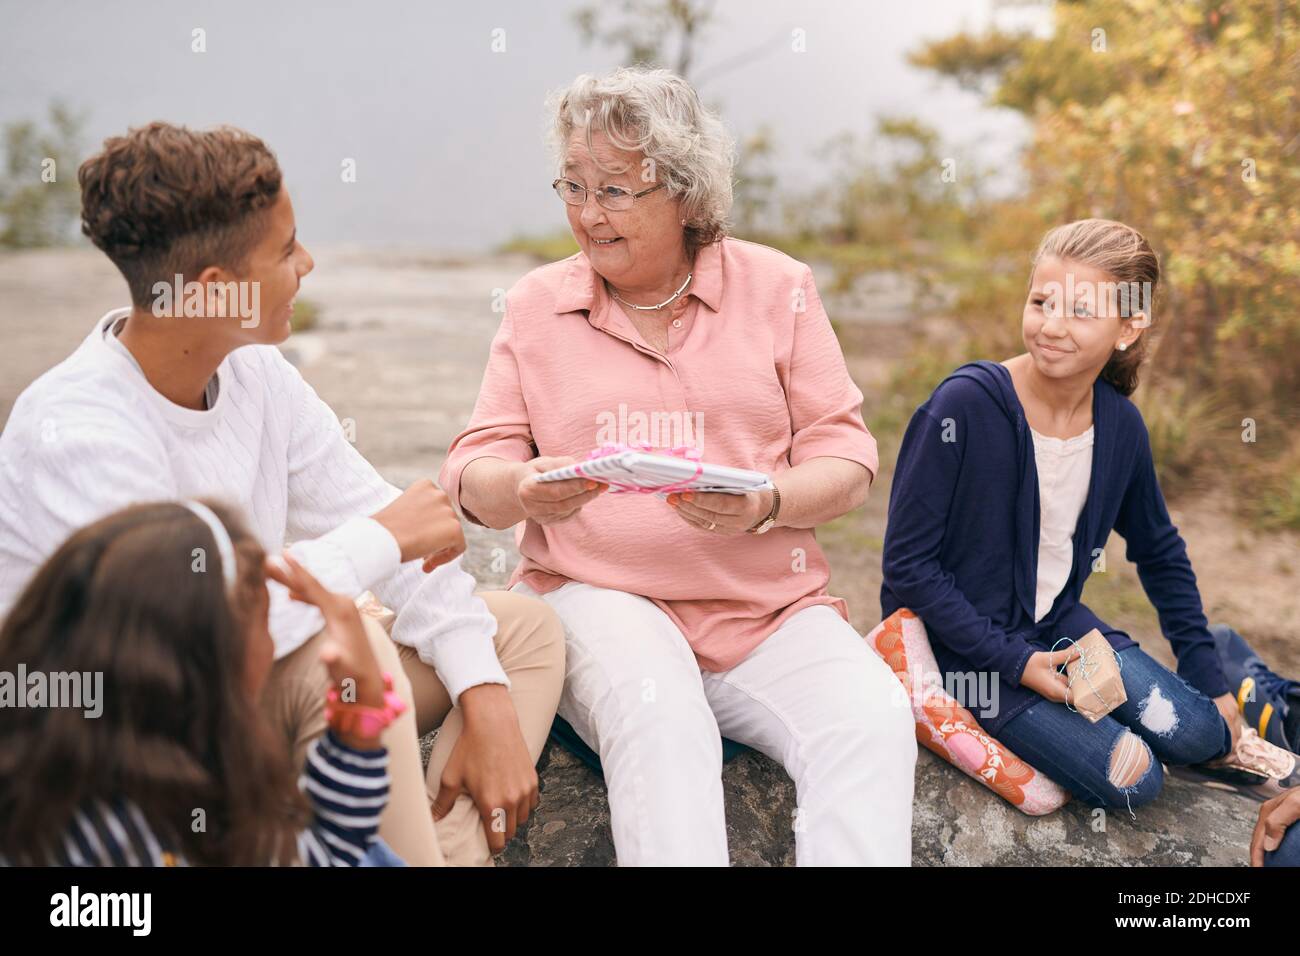 13 15 Years Picnic Group High Resolution Stock Photography and Images -  Alamy